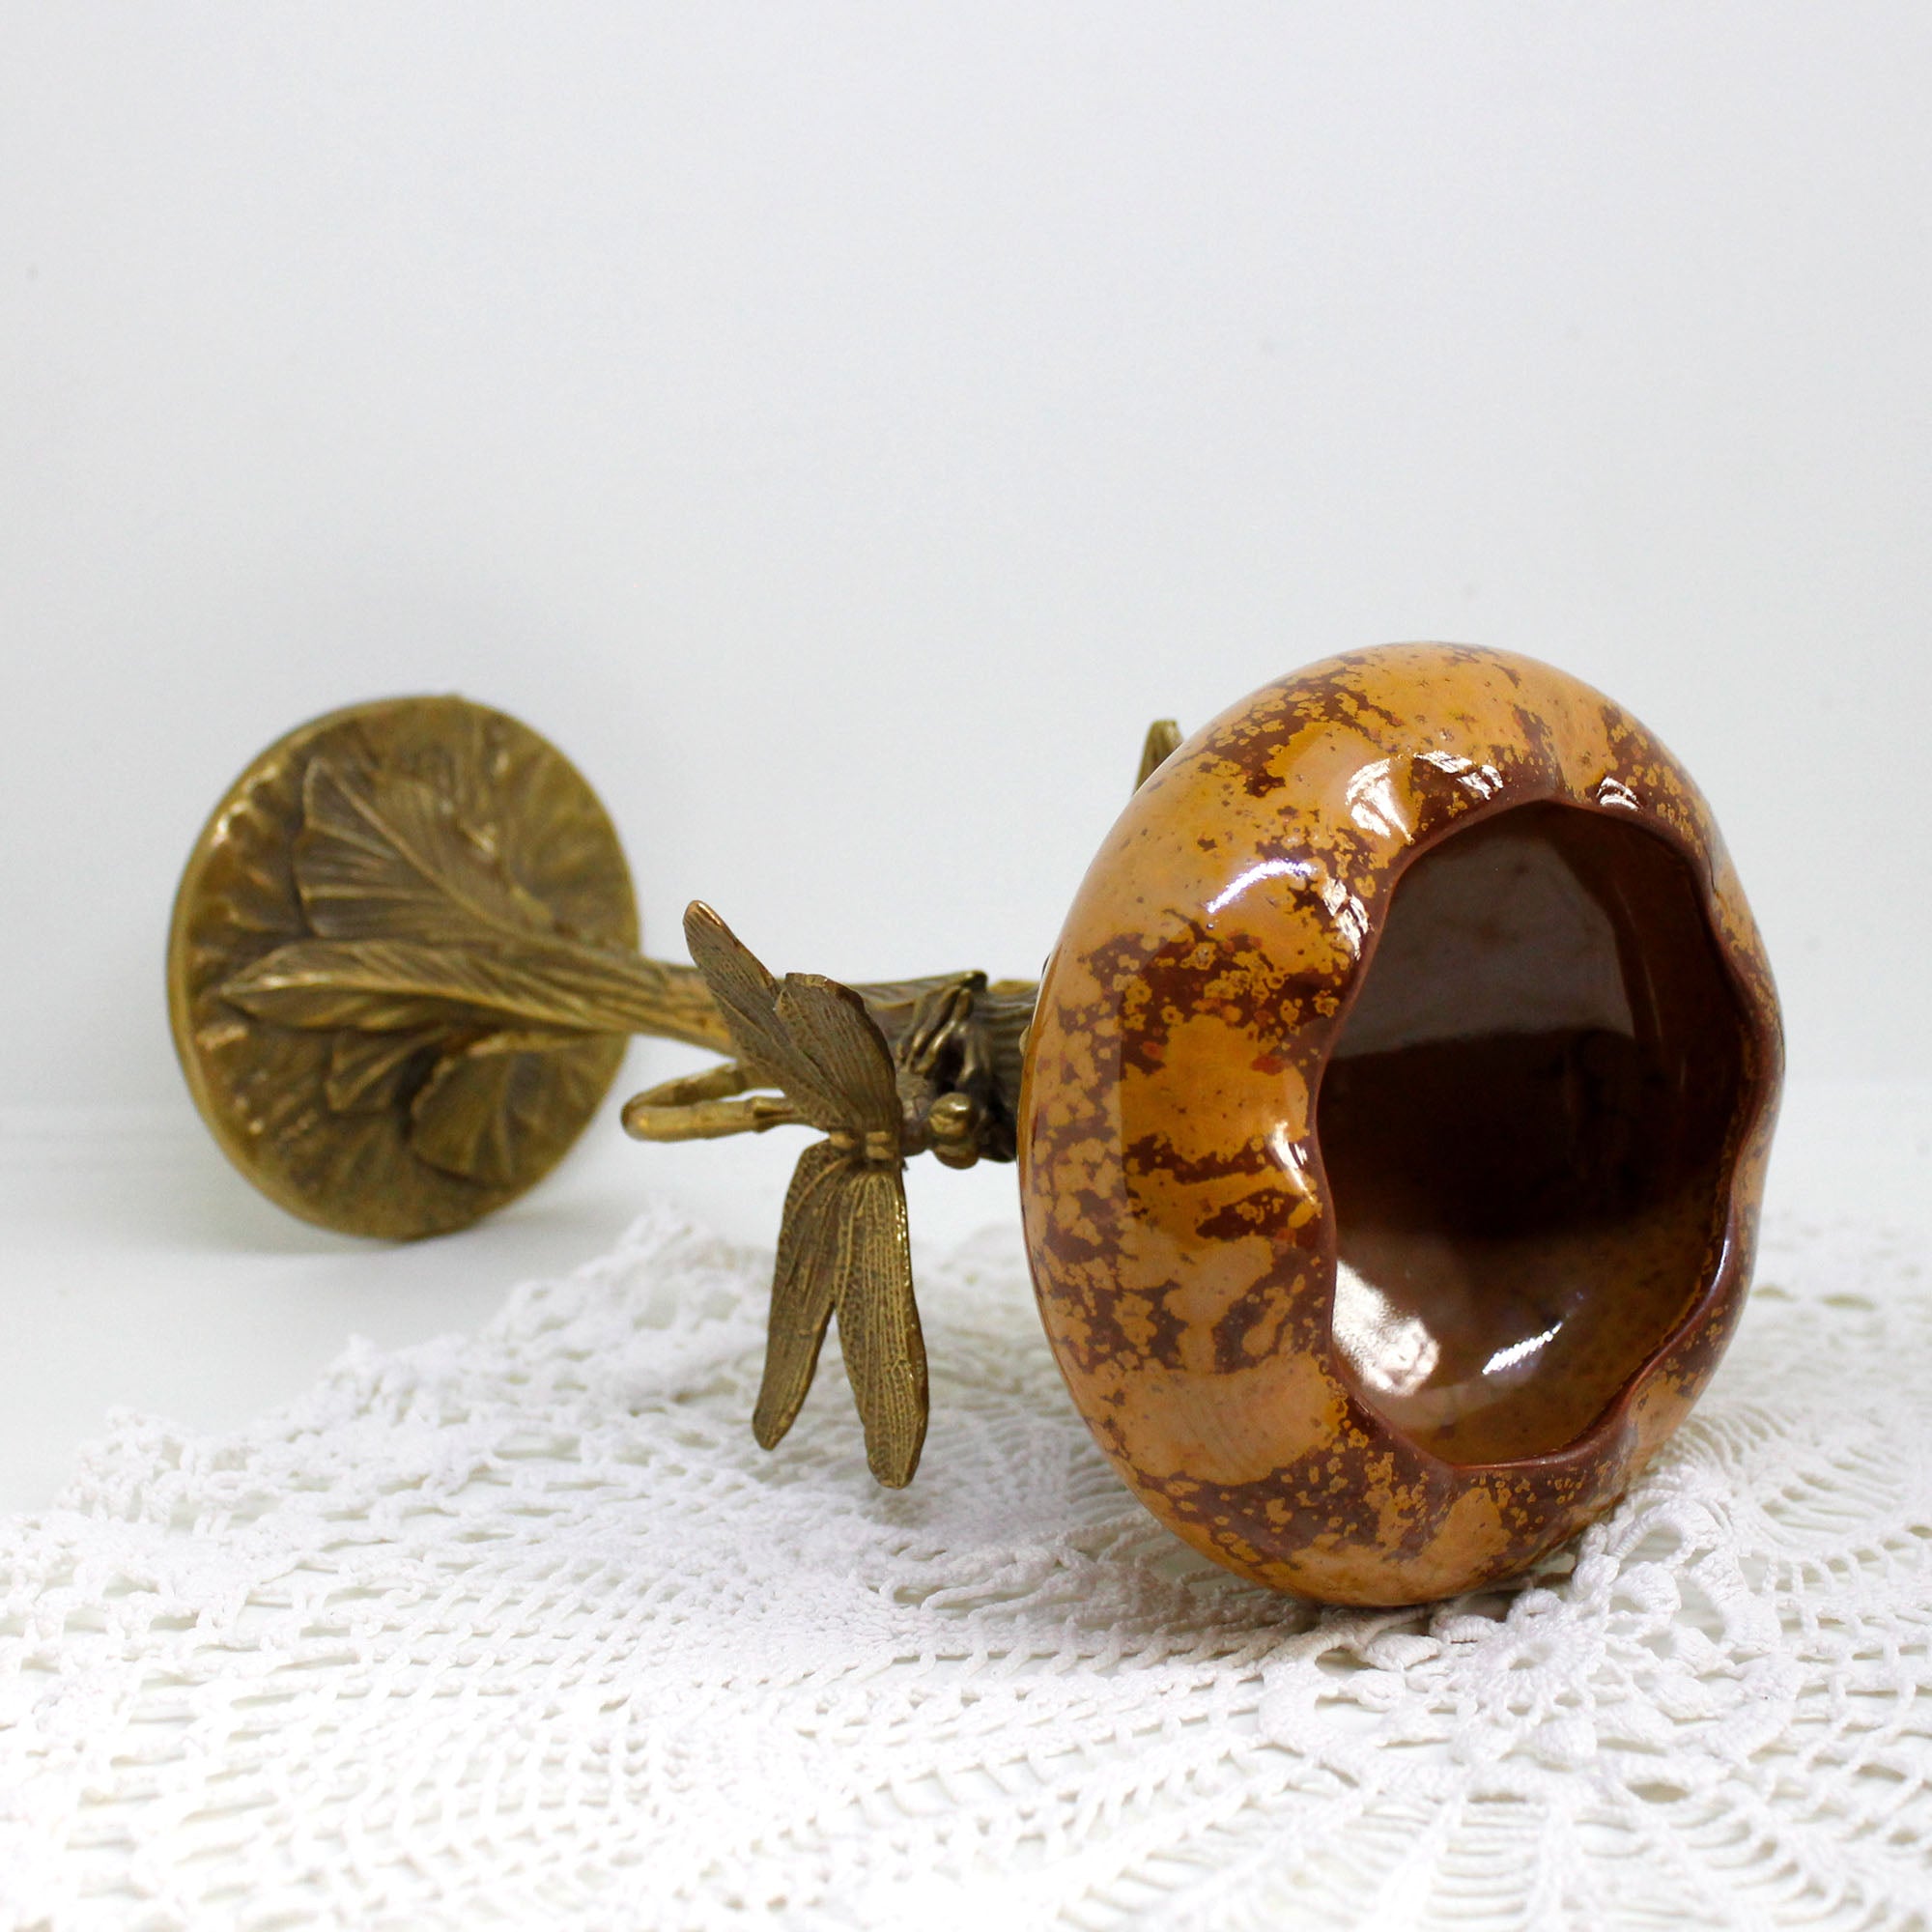 Dragonfly Bowl for Sweets